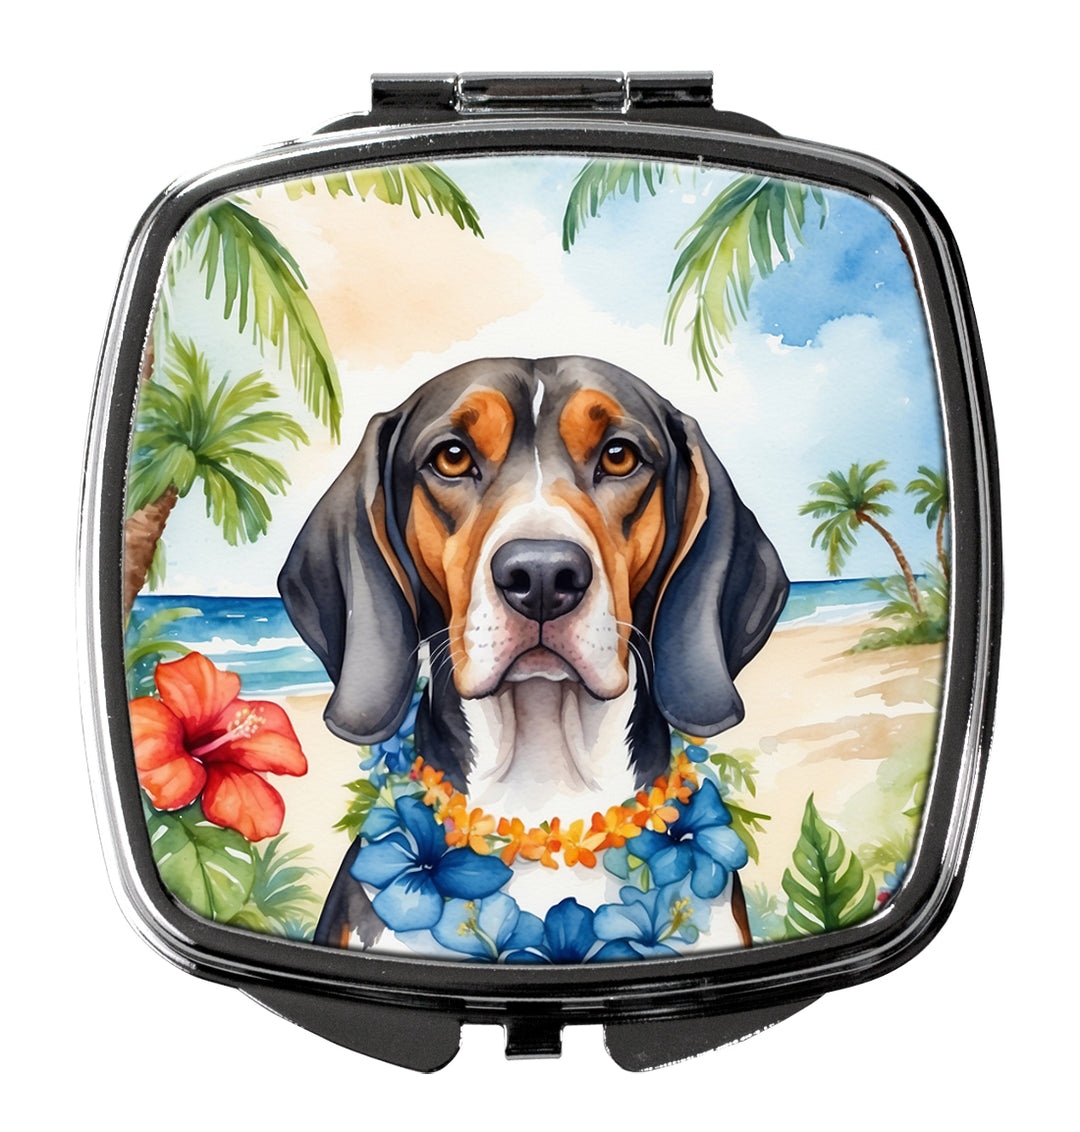 Yorkshire Terrier Luau Compact Mirror Image 8